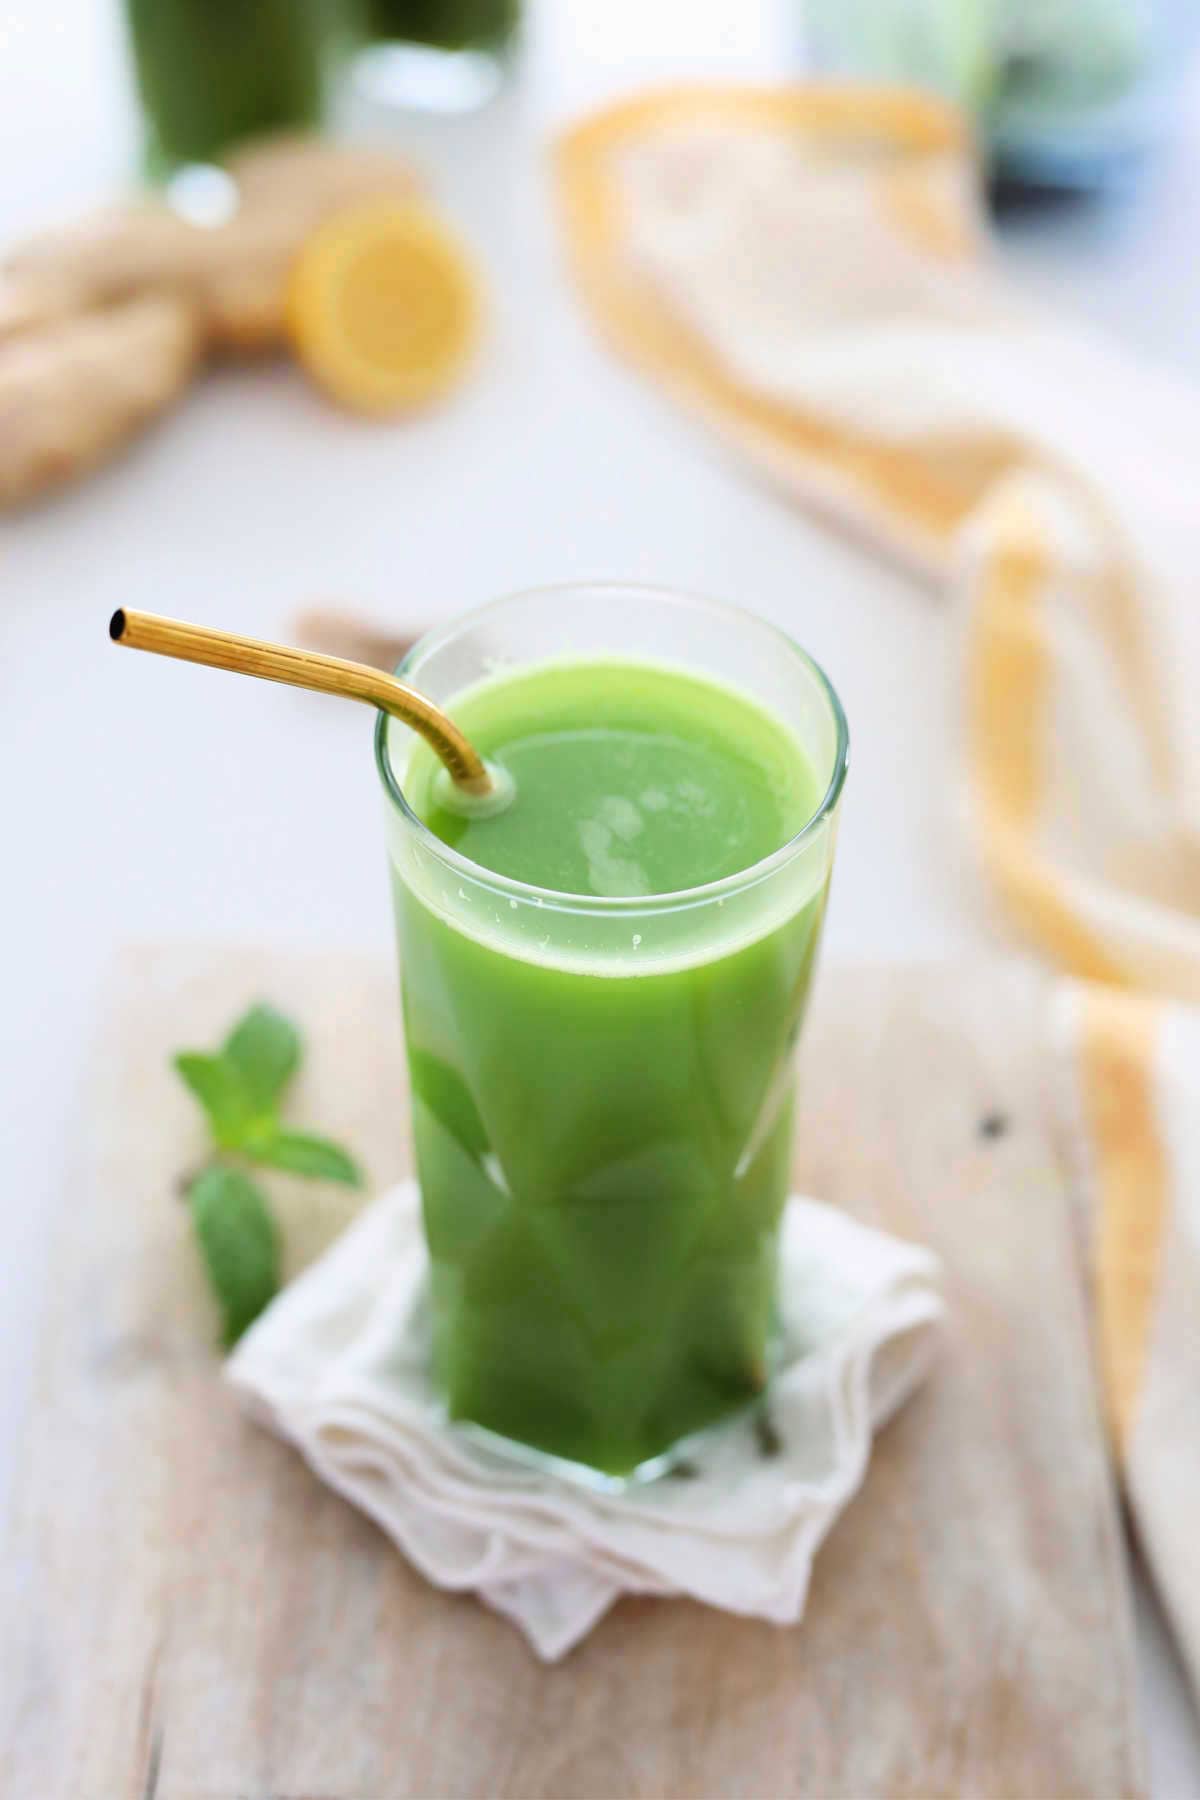 Fresh homemade green juice made with vegetables in a glass with a gold straw